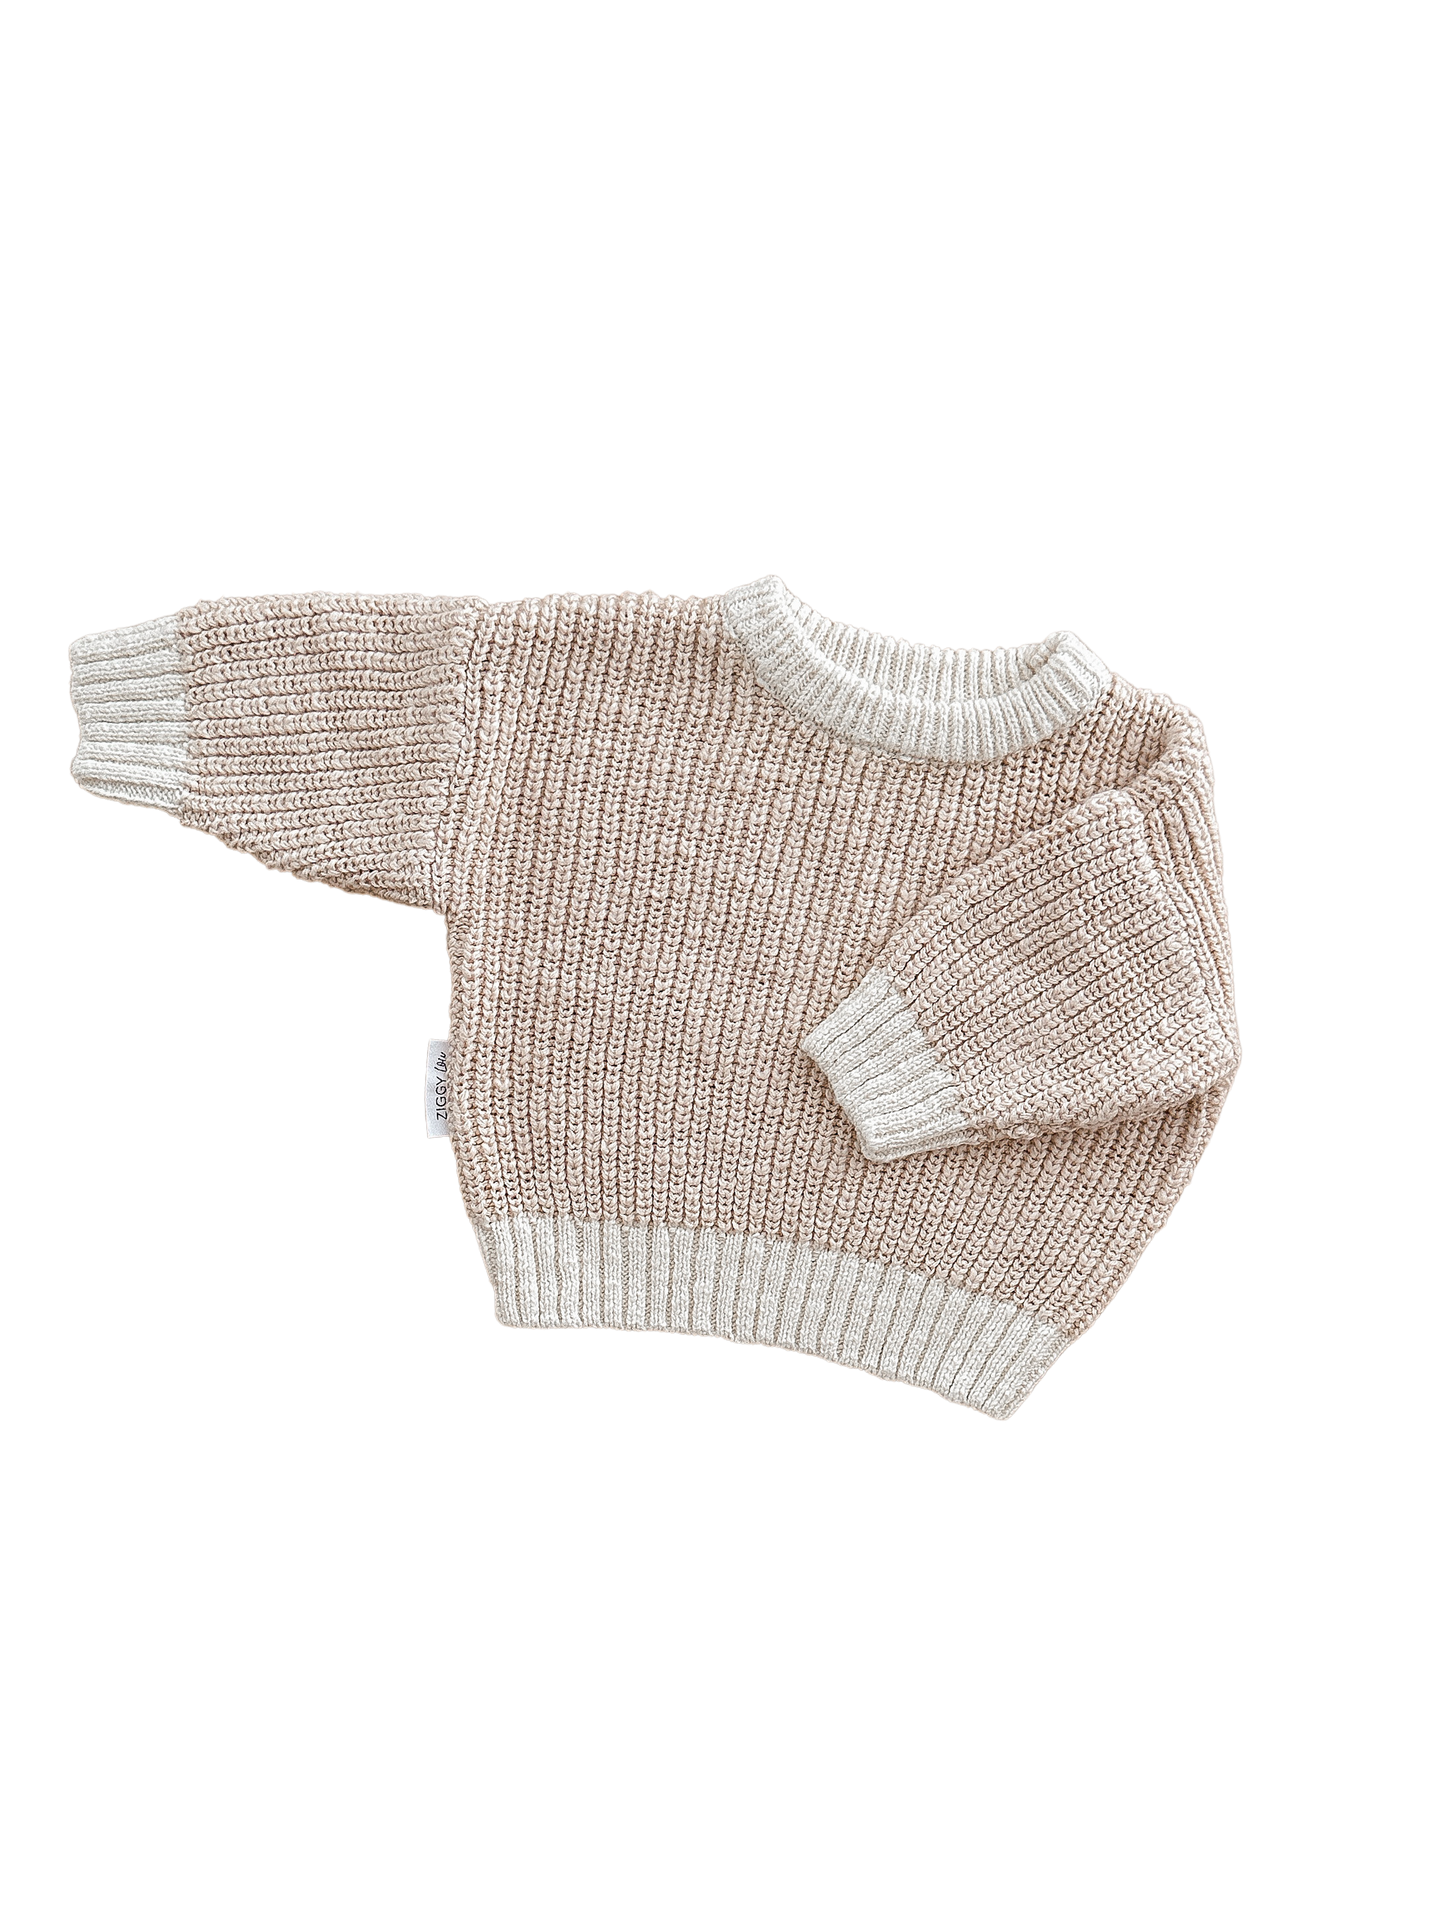 By Ziggy Lou - 100% cotton baby clothing. Featuring two tone petal jumper.